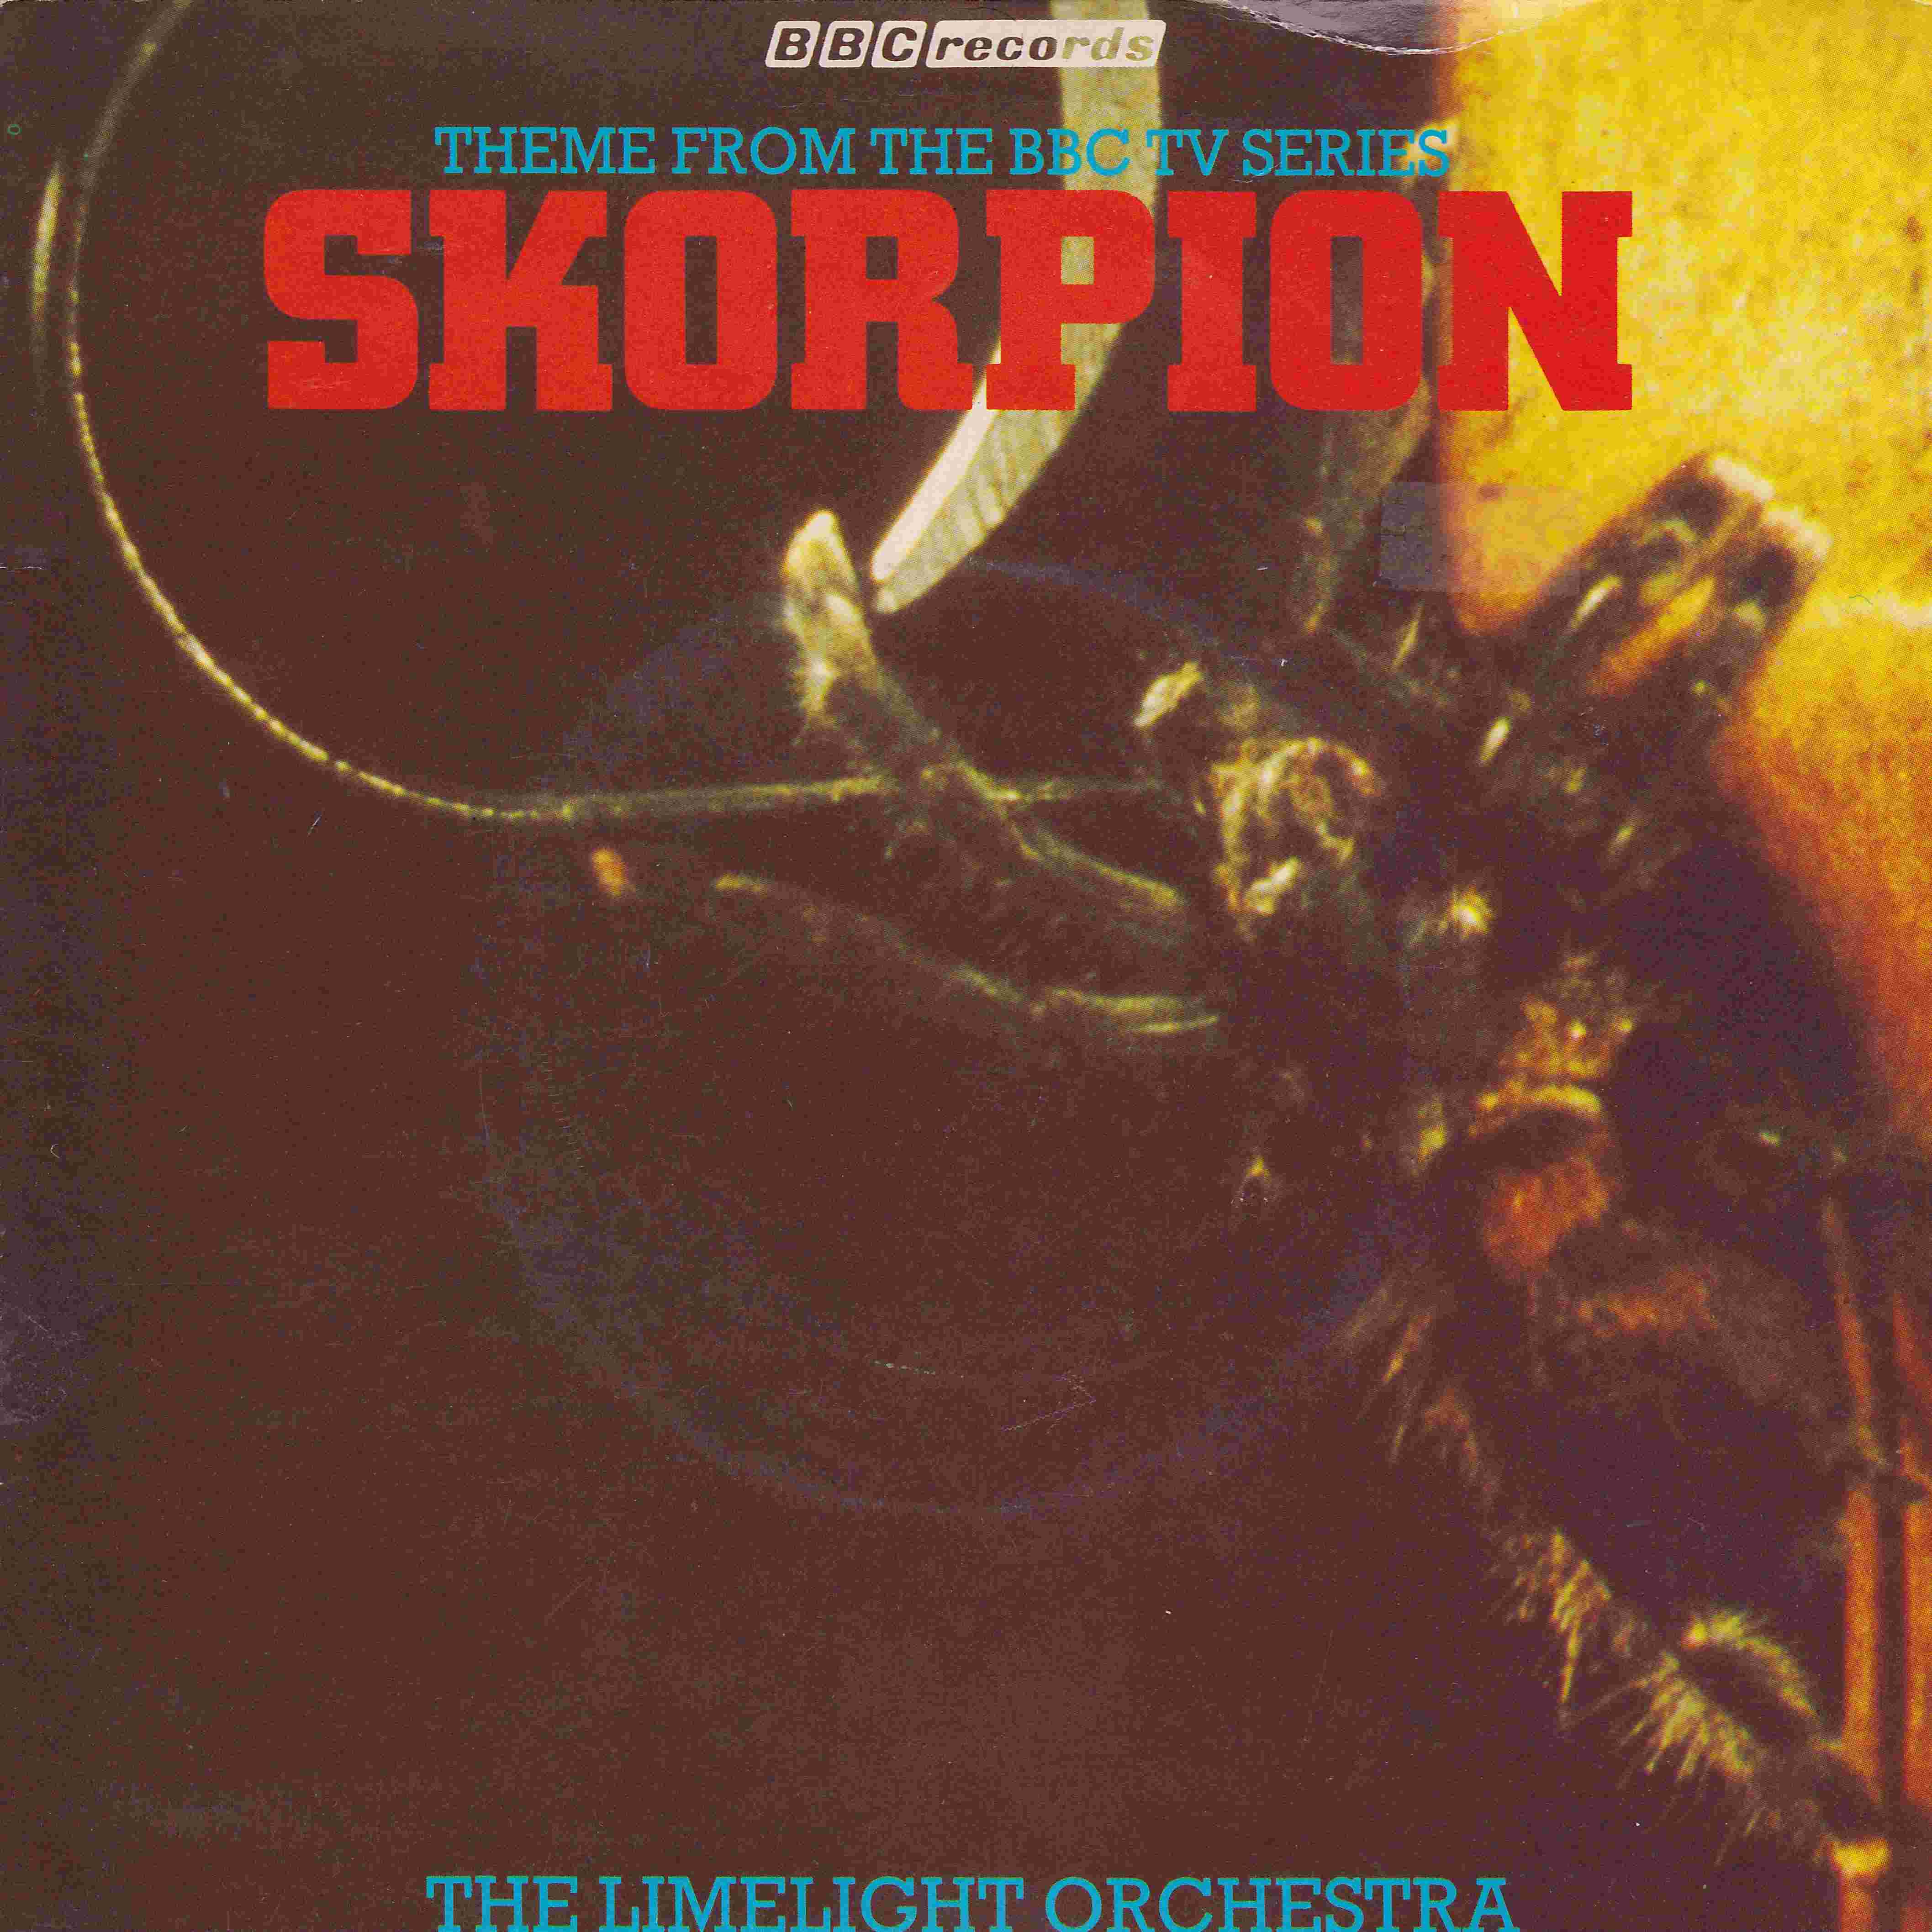 Picture of RESL 126 Skorpion by artist Leslie Osborne / Simon May / The Limelight Orchestra from the BBC records and Tapes library